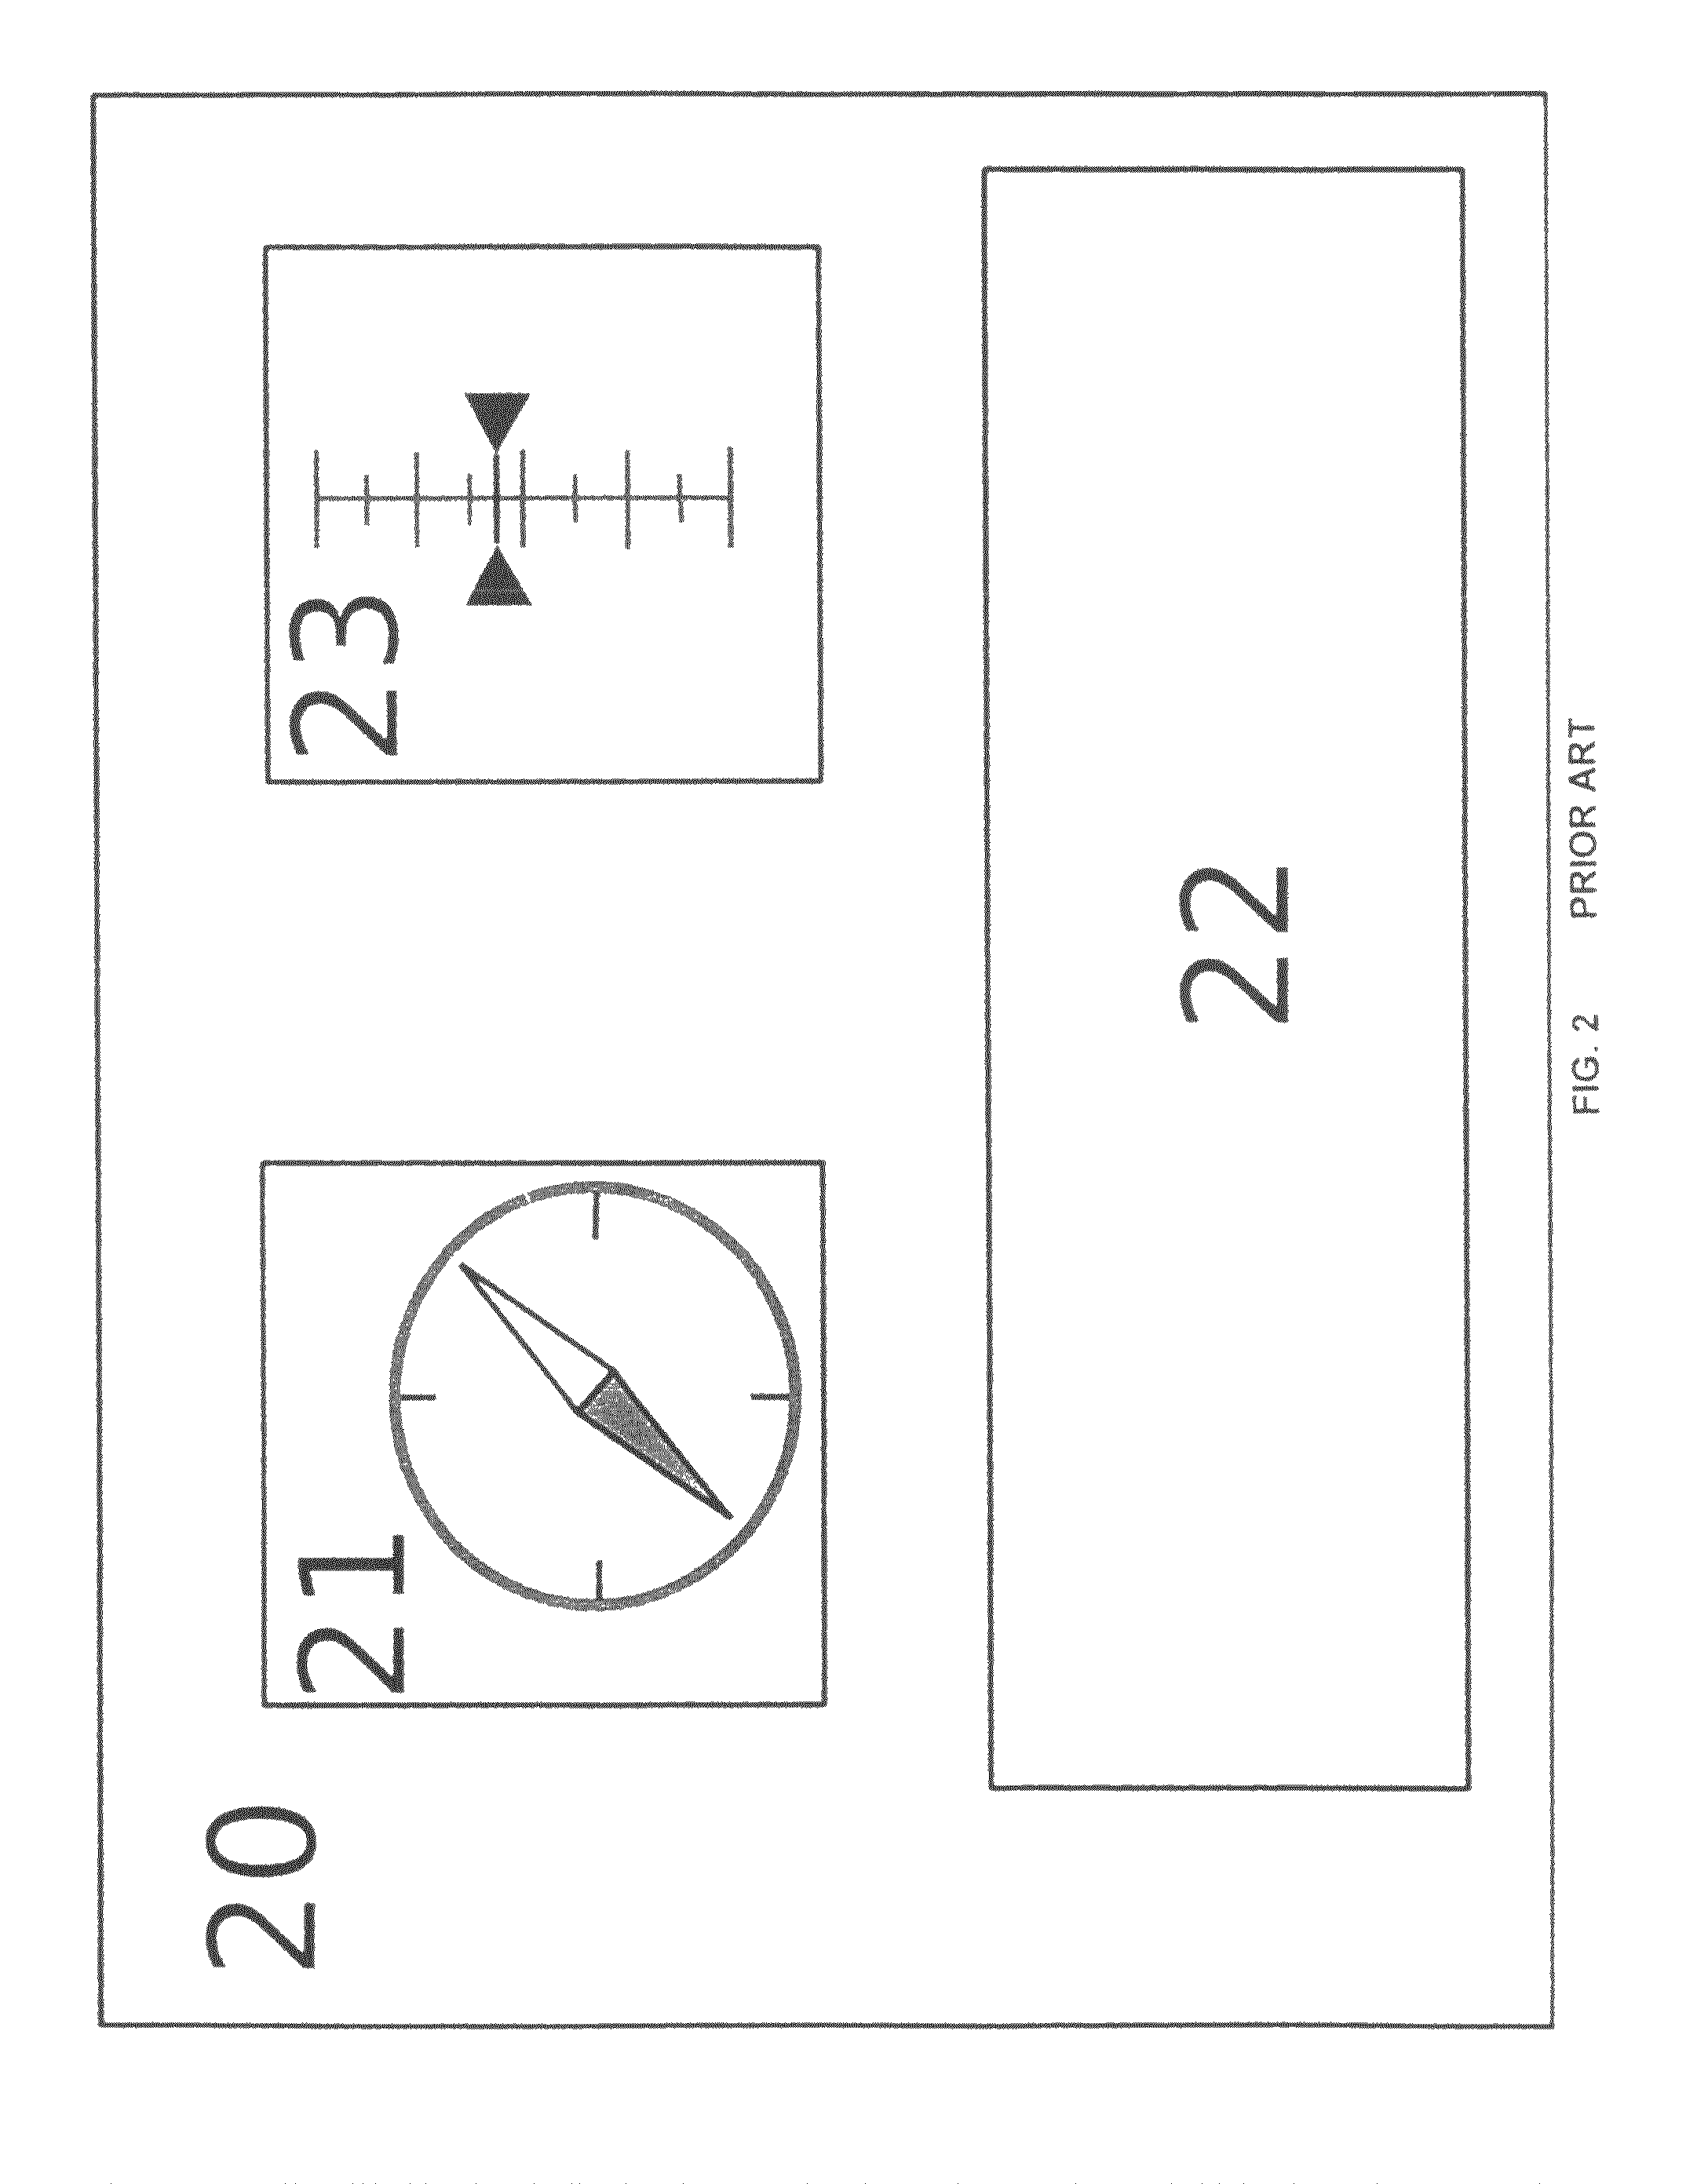 Magnetic sensing device for navigation and detecting inclination